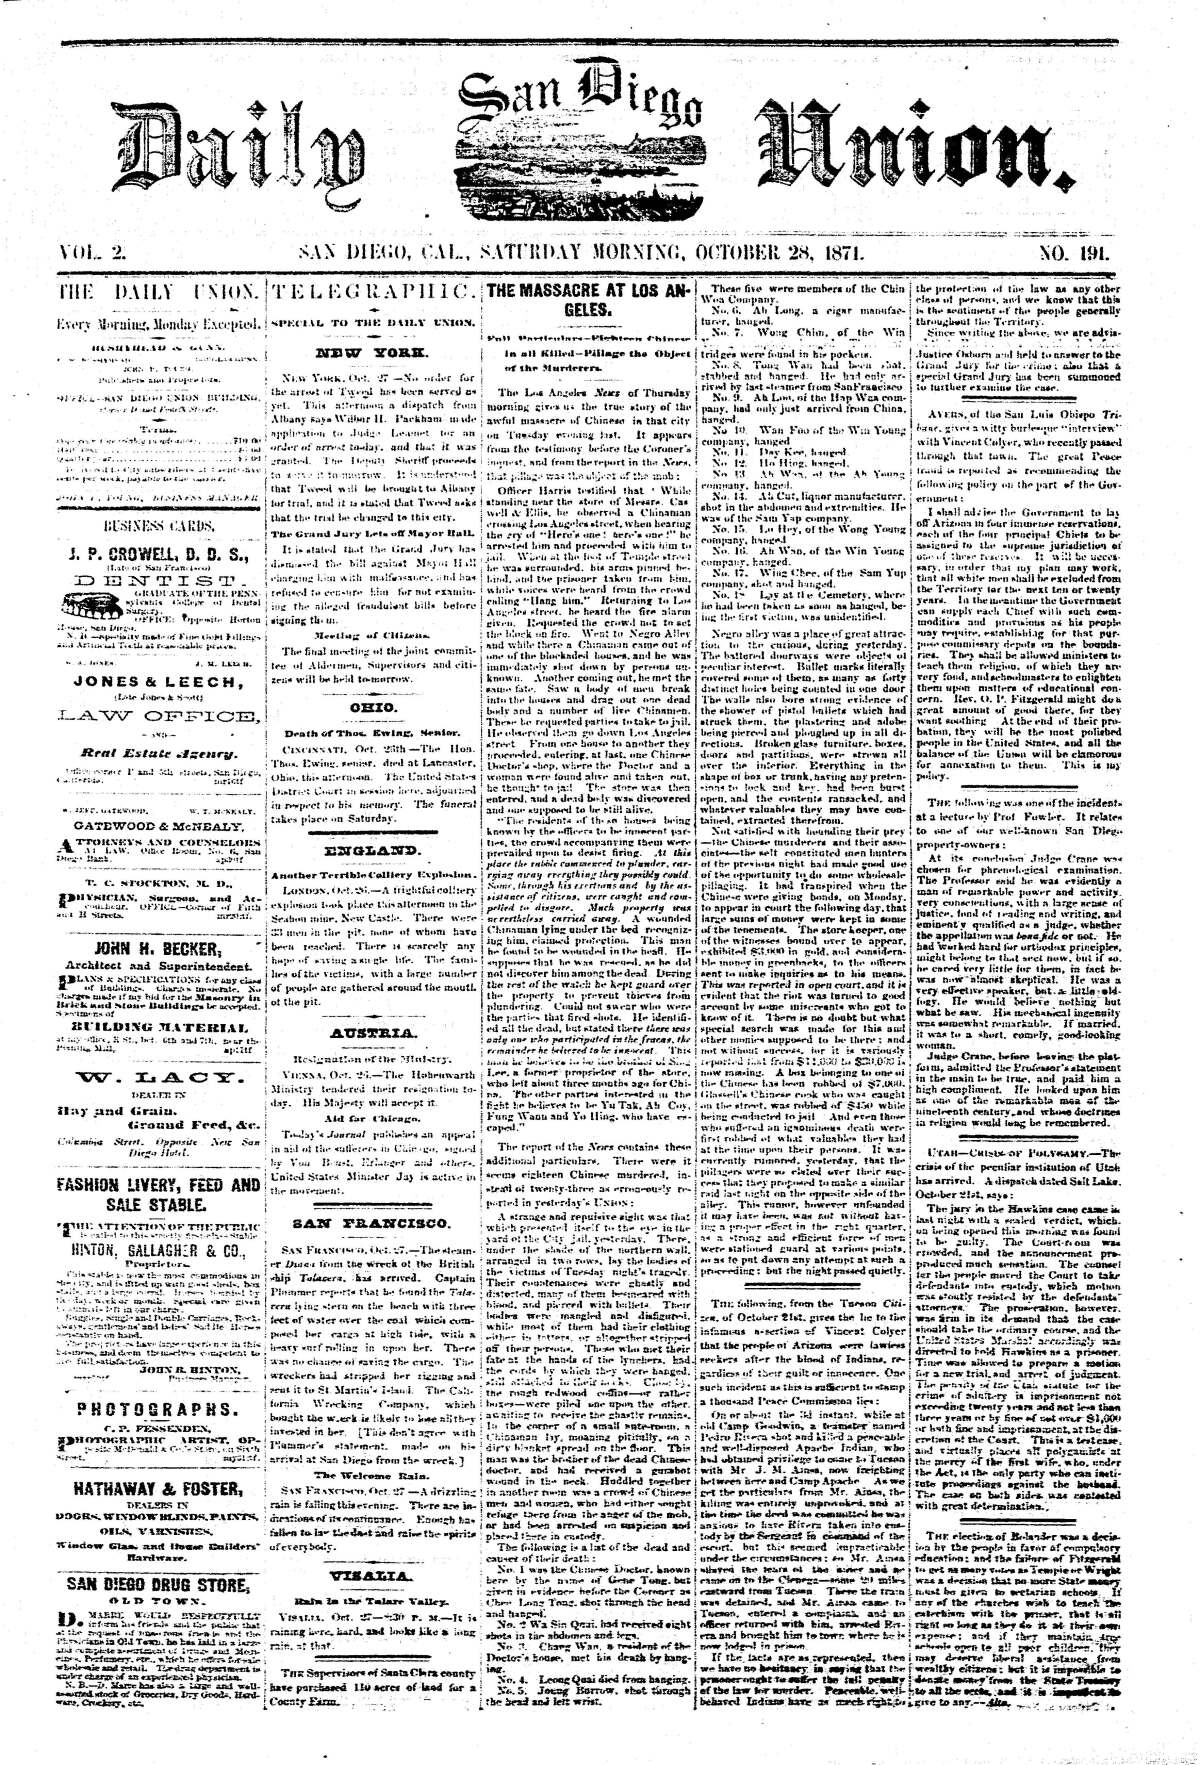 The front page of The Daily San Diego Union, Oct. 28,1871 